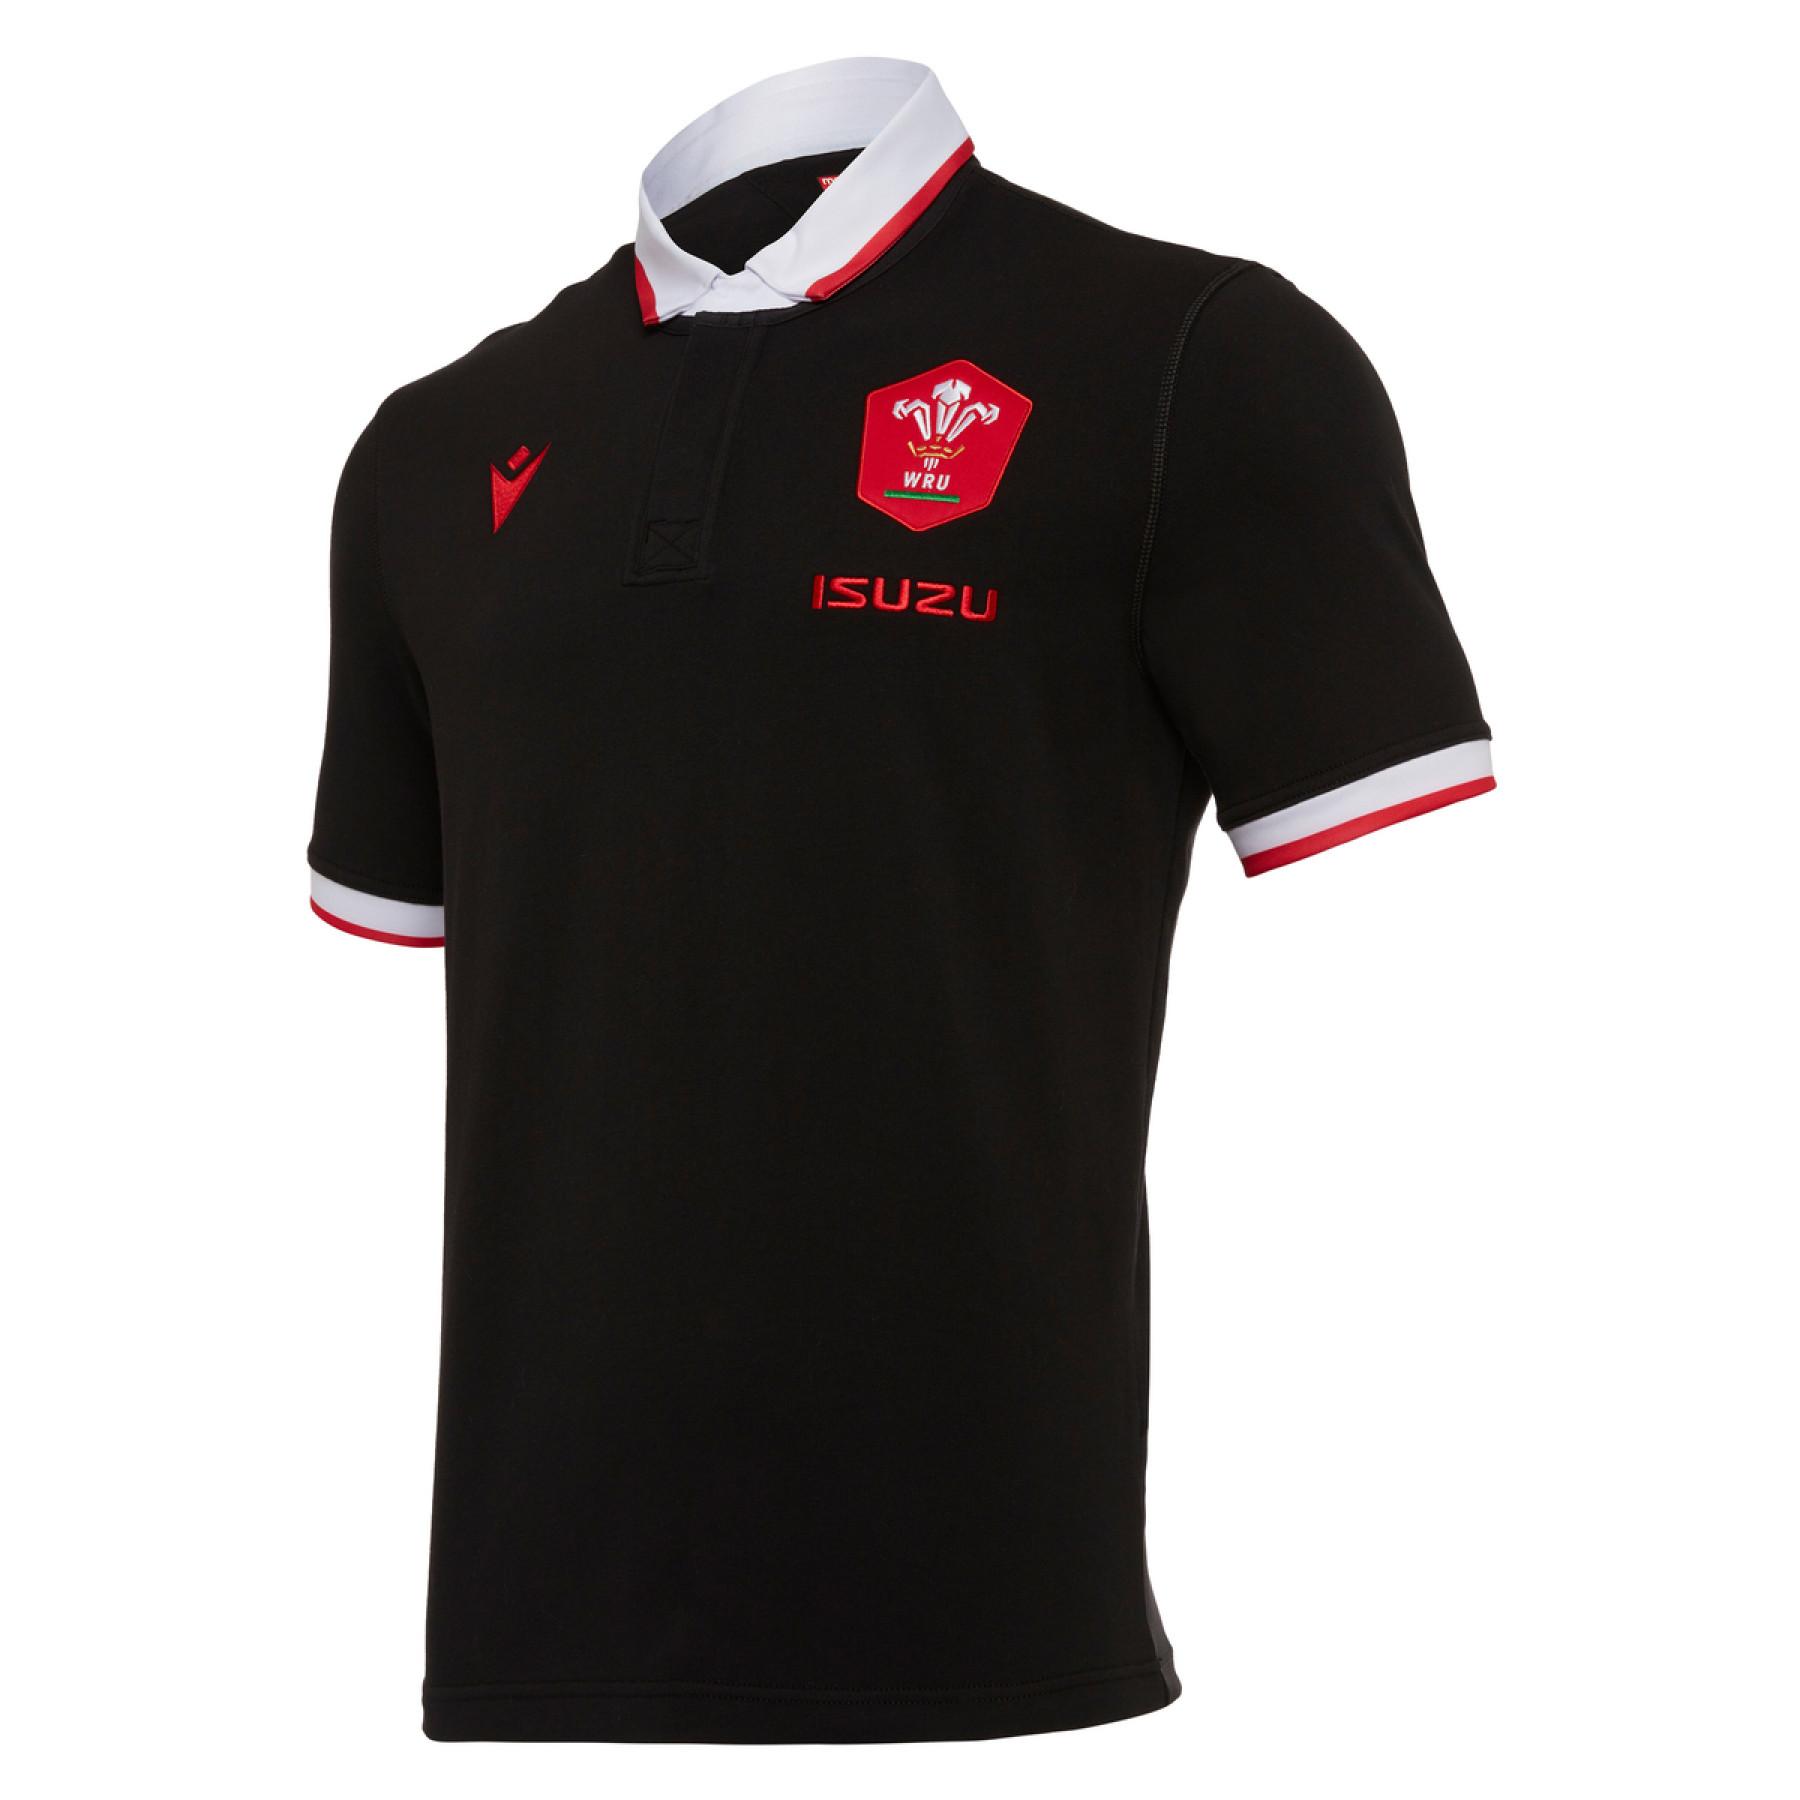 Cotton outer shirt Pays de galles rugby 2020/21